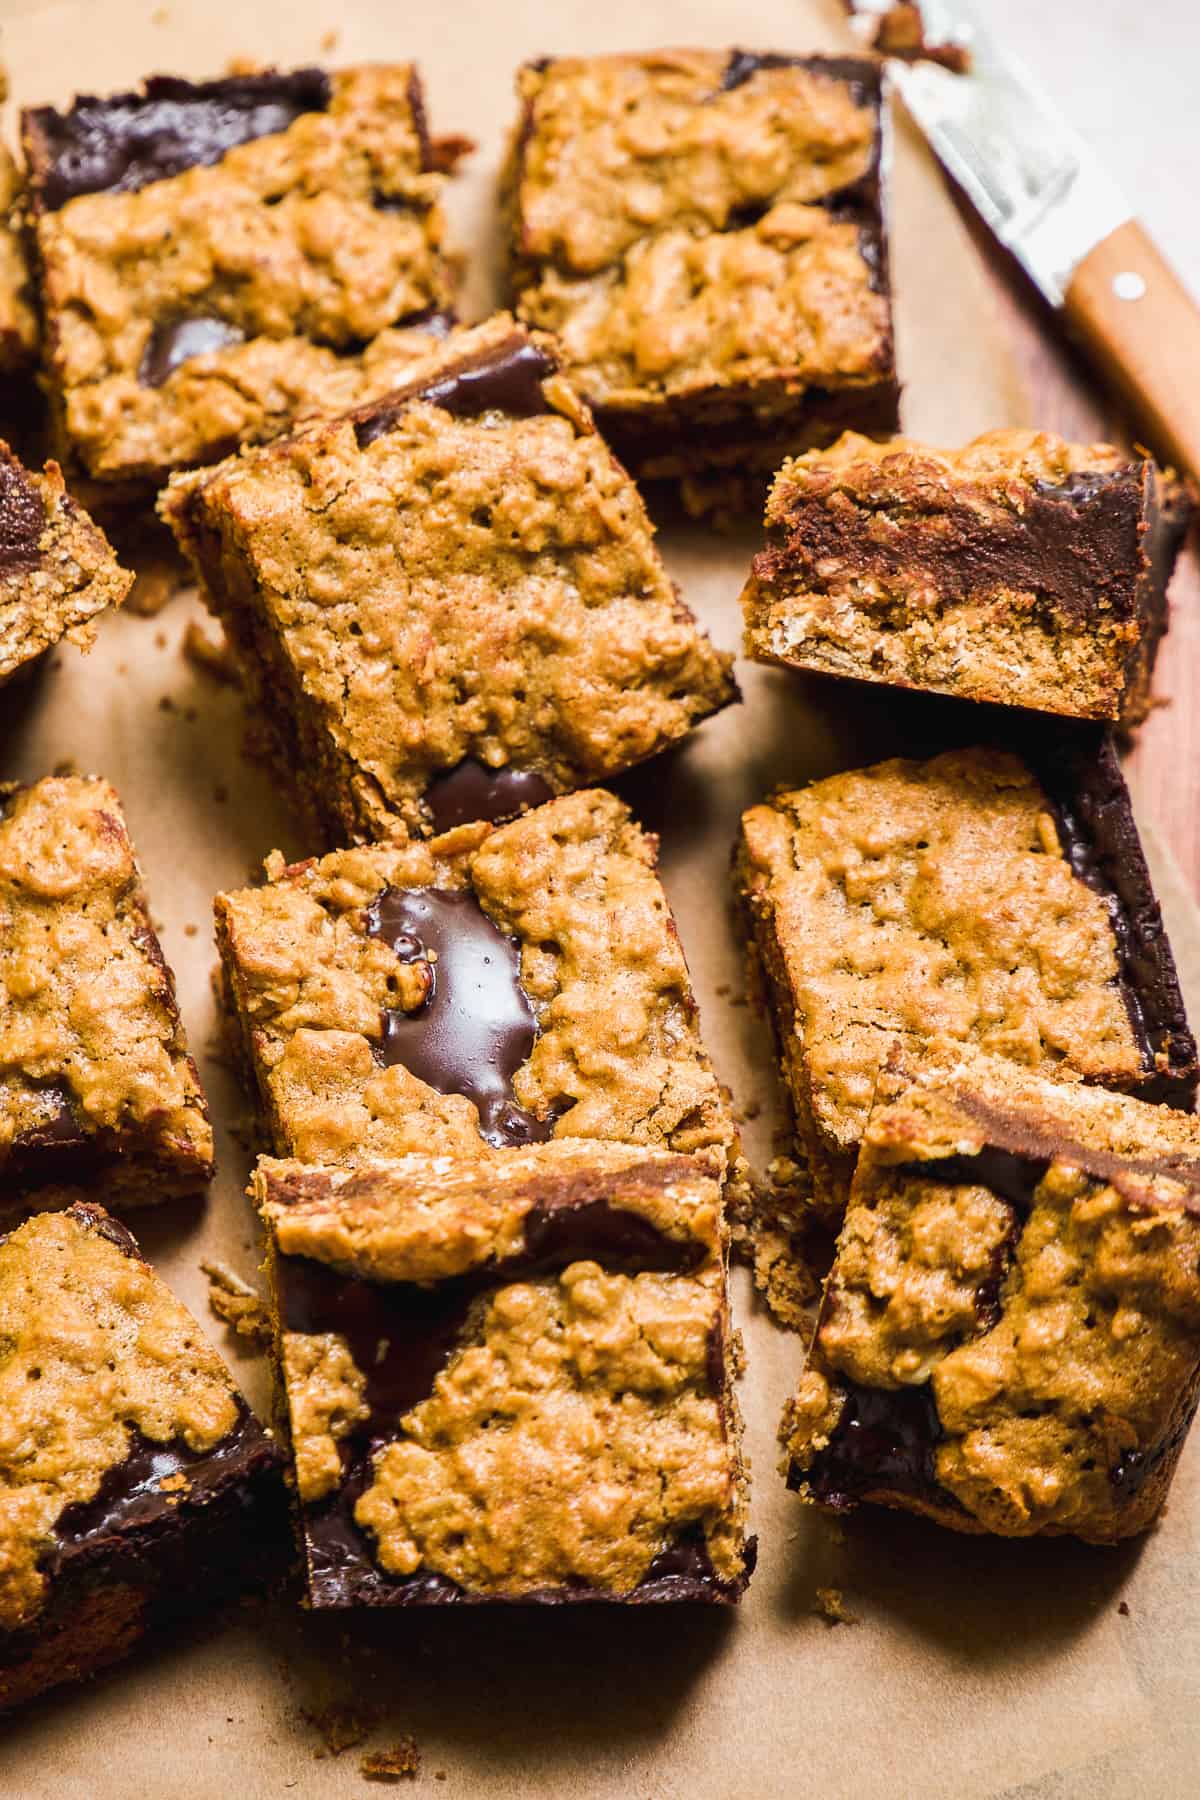 Oatmeal fudge bars piled up on a wooden platter.